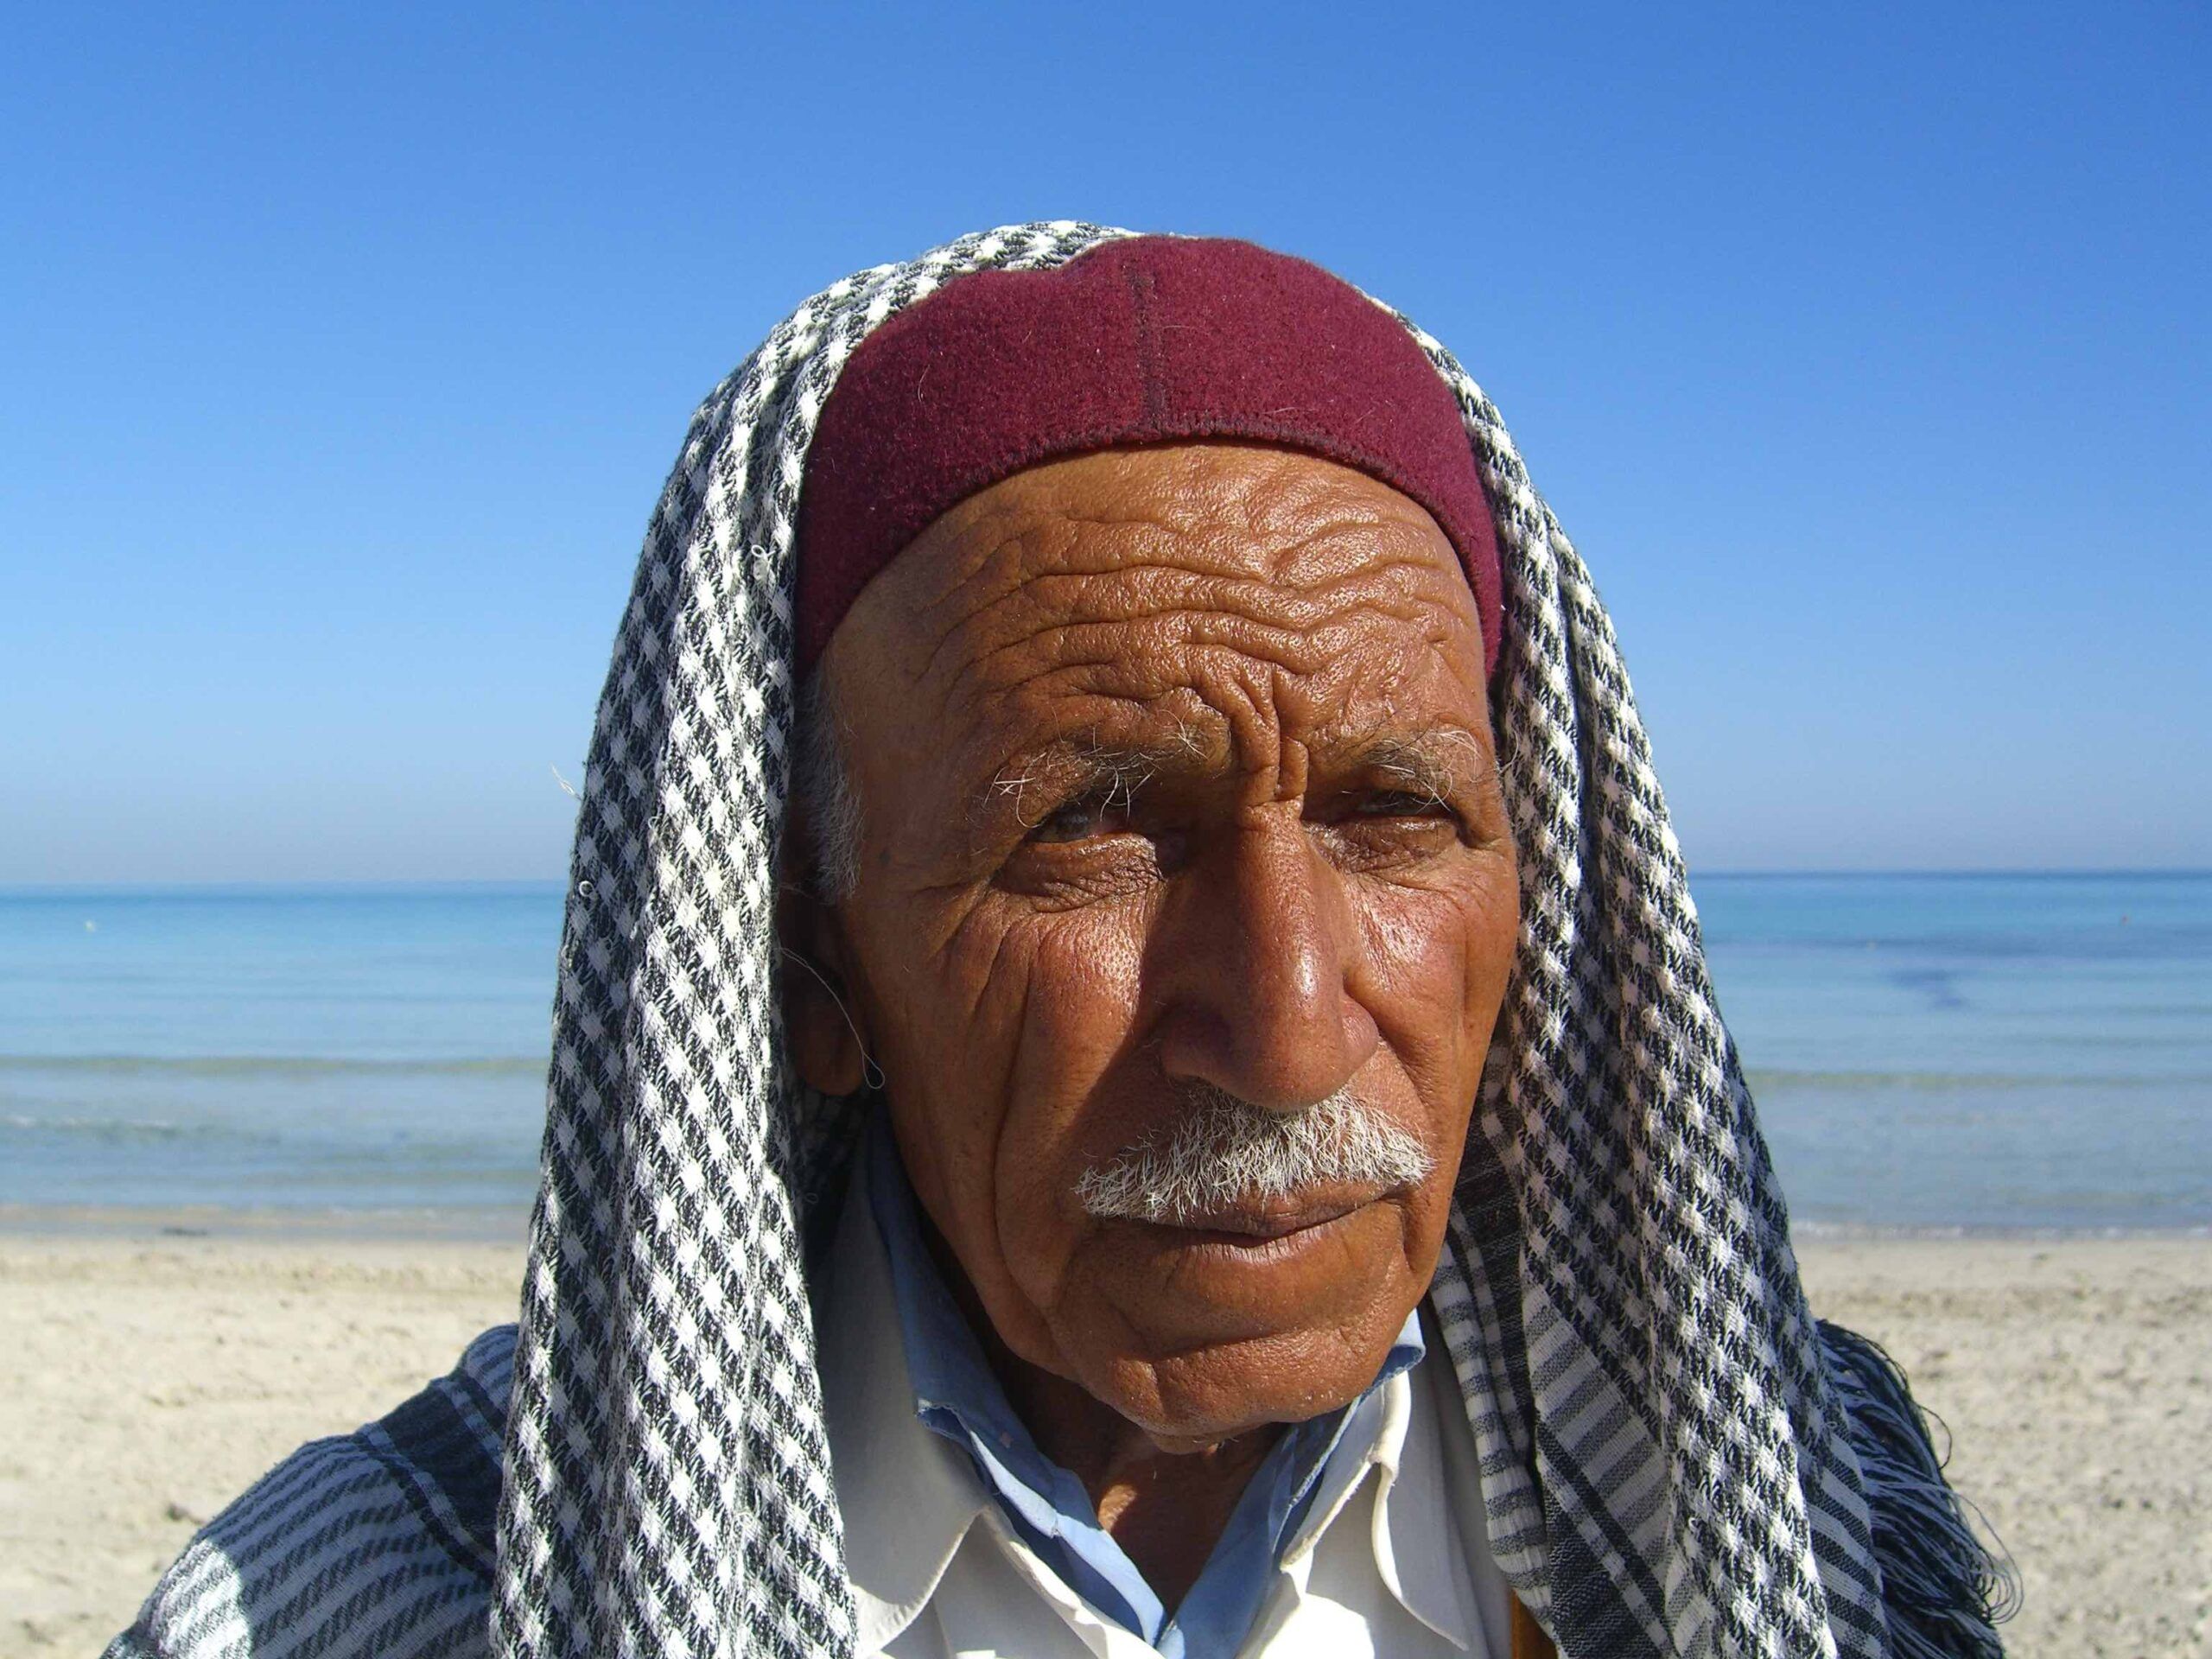 Man with a mustache wearing a head scarf in the desert.